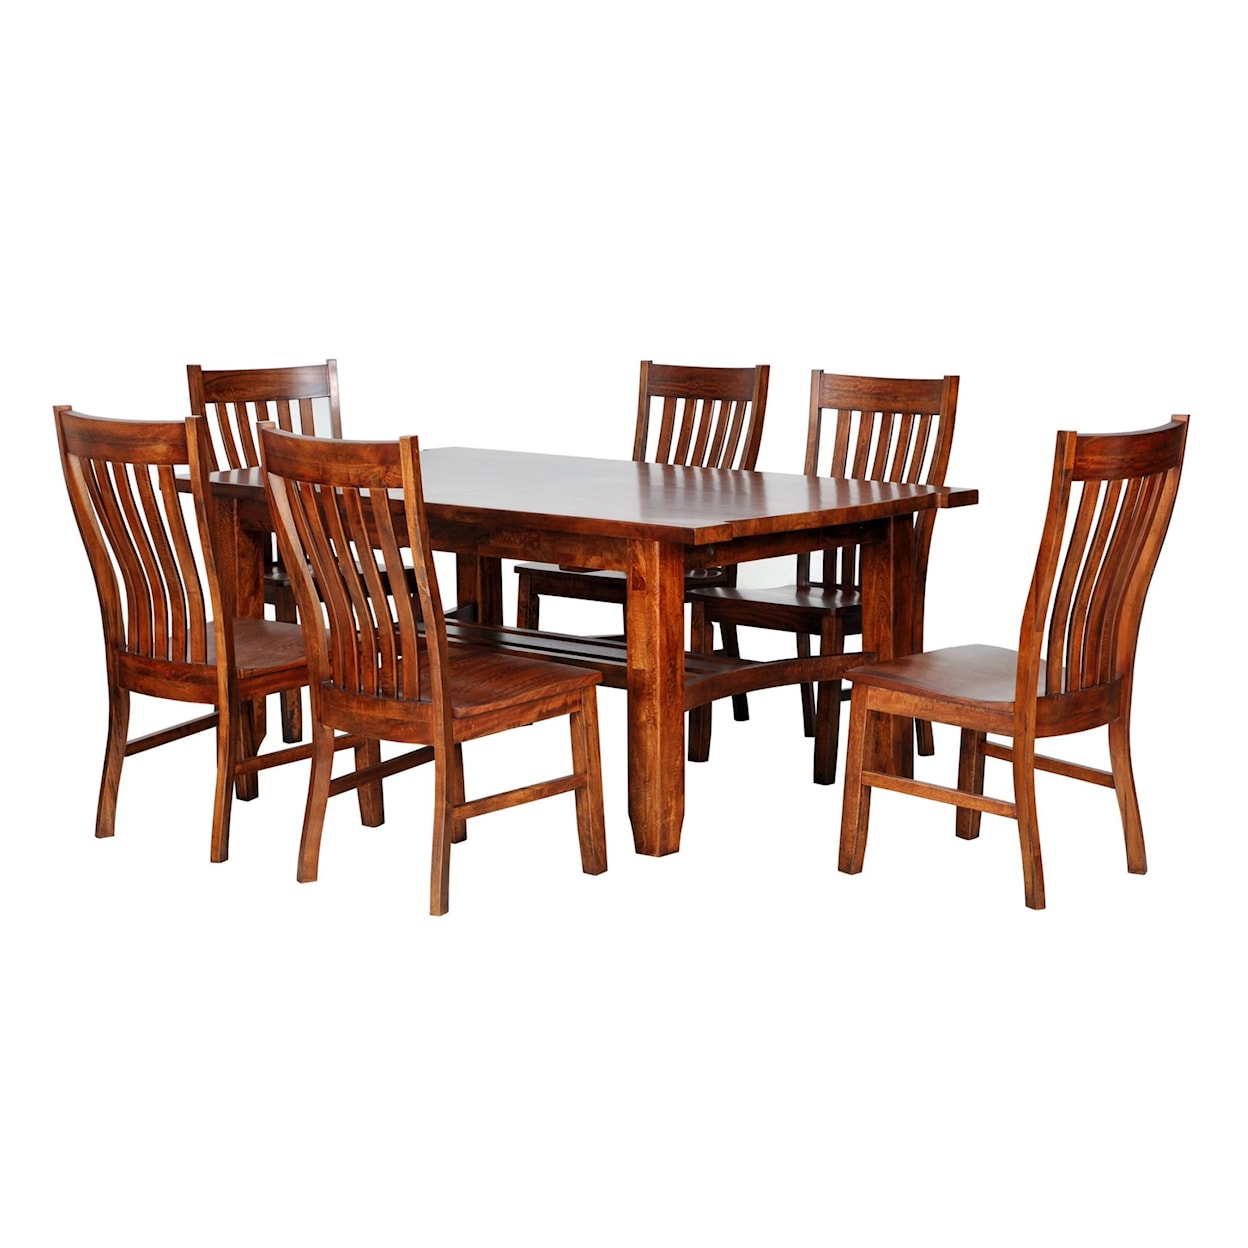 Napa Furniture Design Whistler Retreat Dining Table with Extension